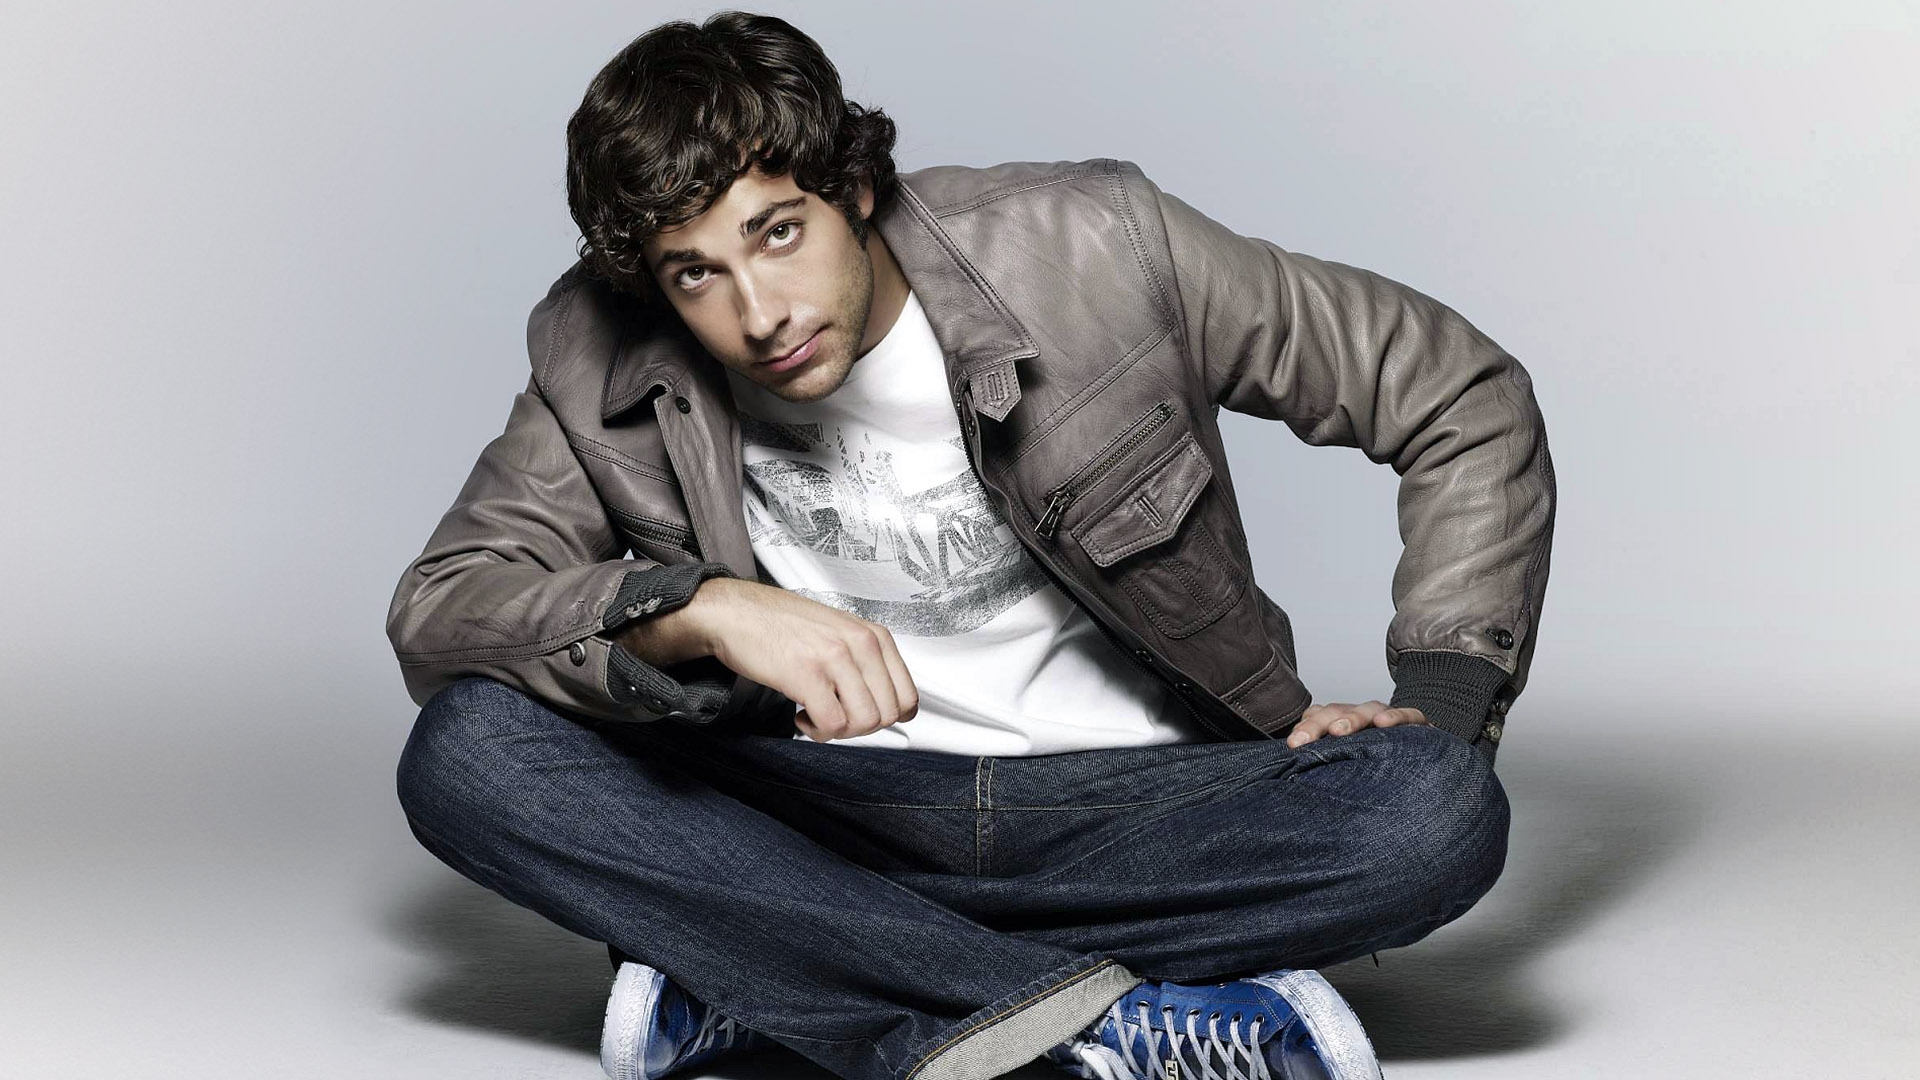 Zachary Levi Looking up for 1920 x 1080 HDTV 1080p resolution